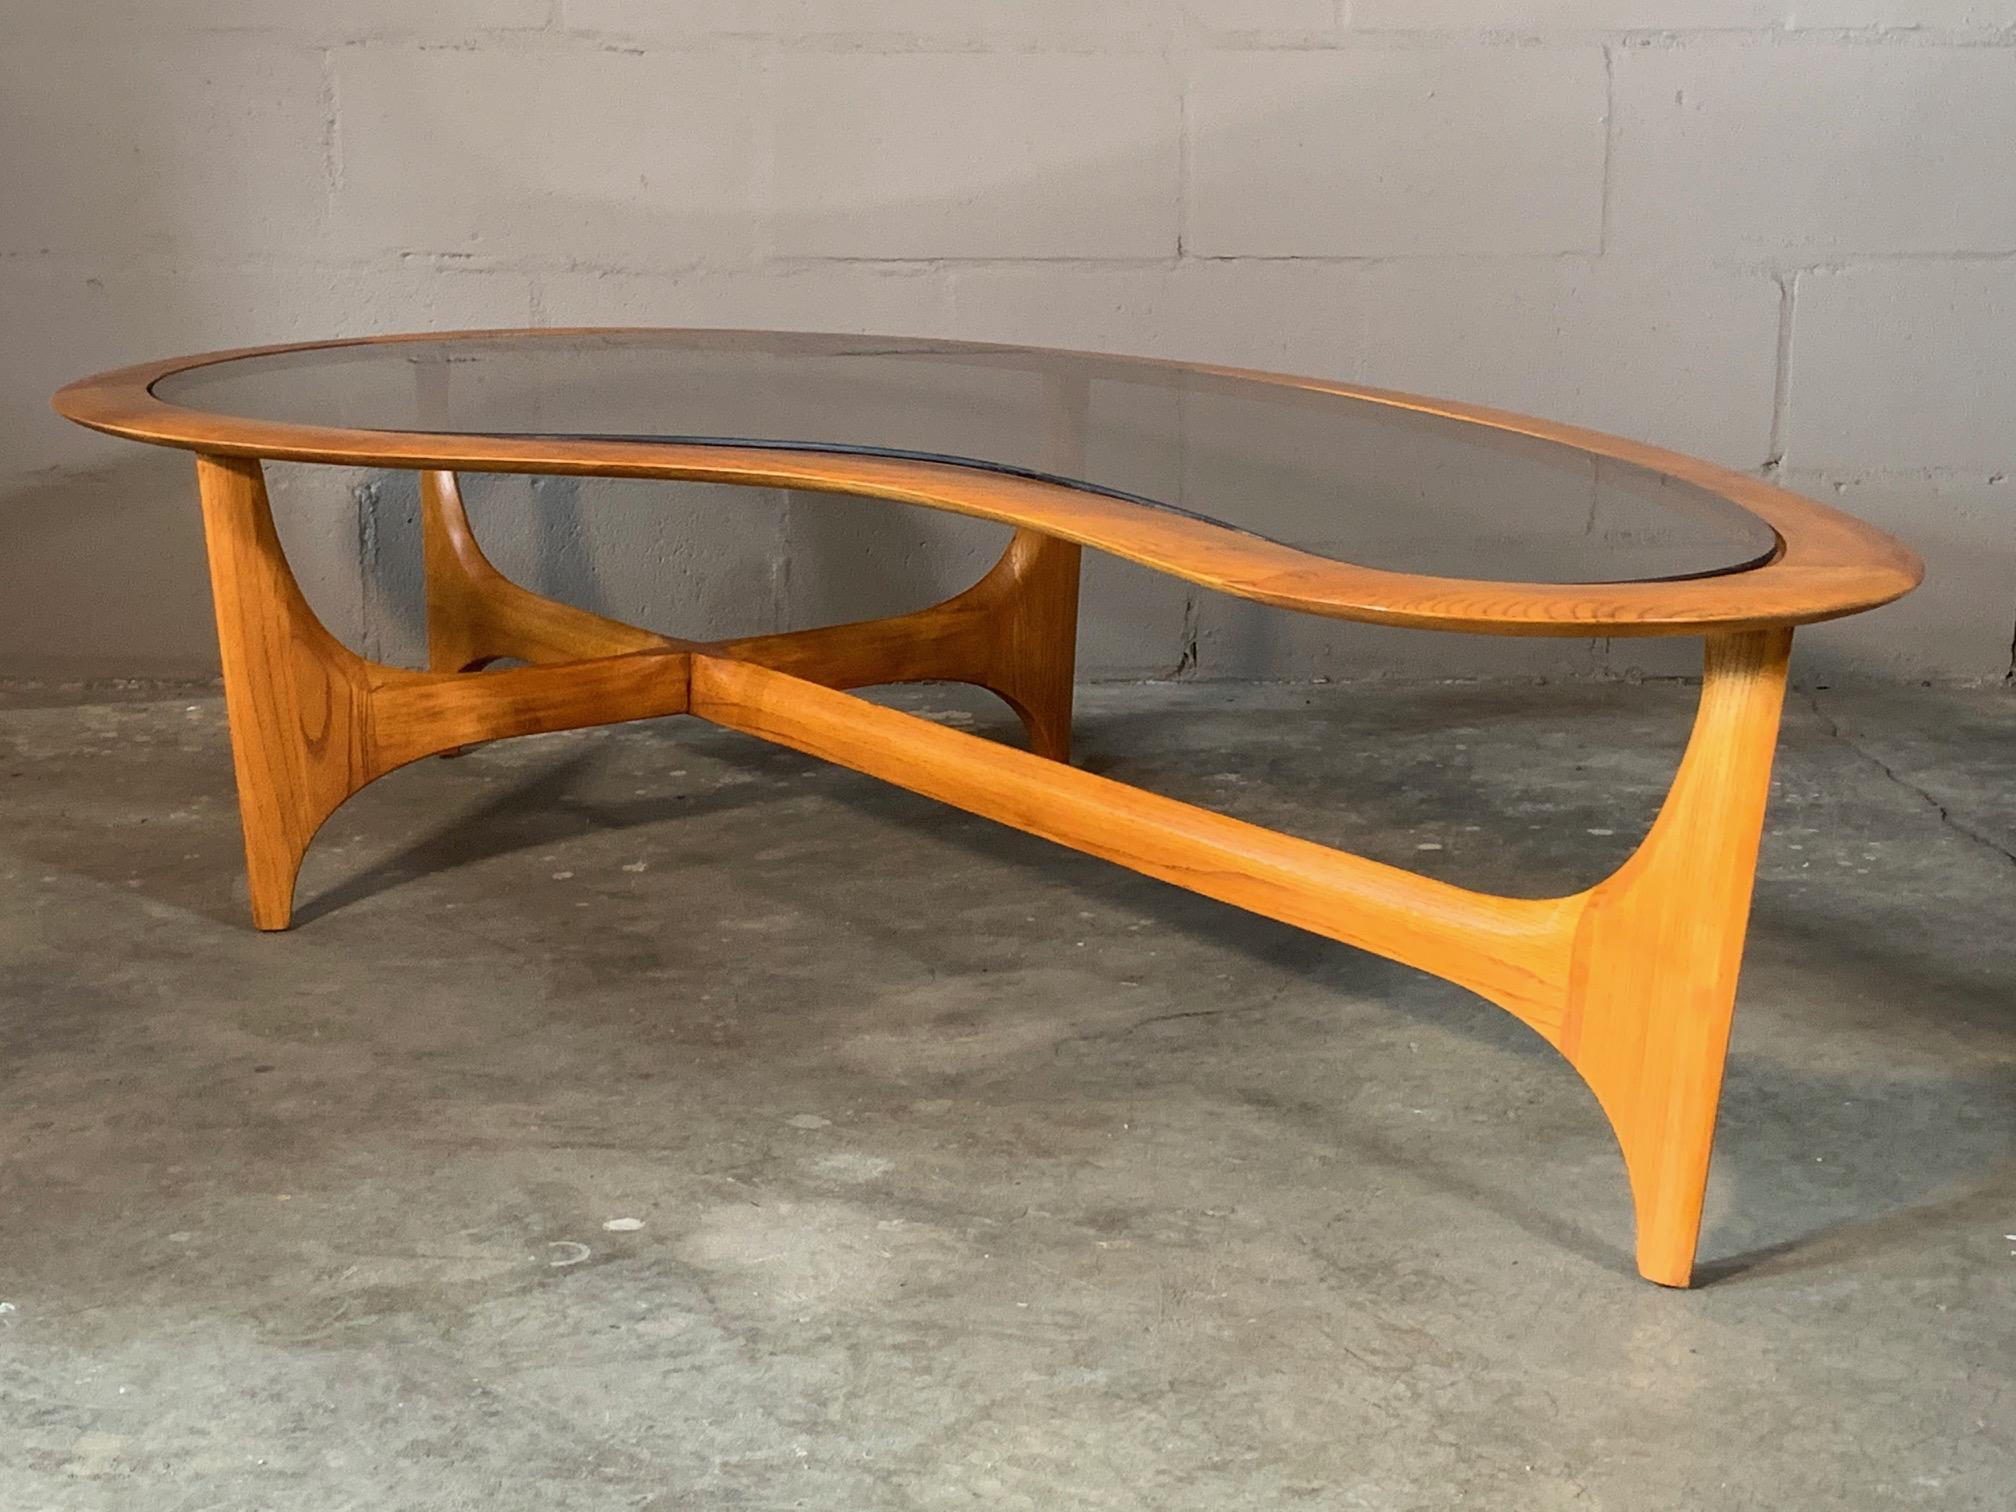 Biomorphic Coffee Table by Lane 3